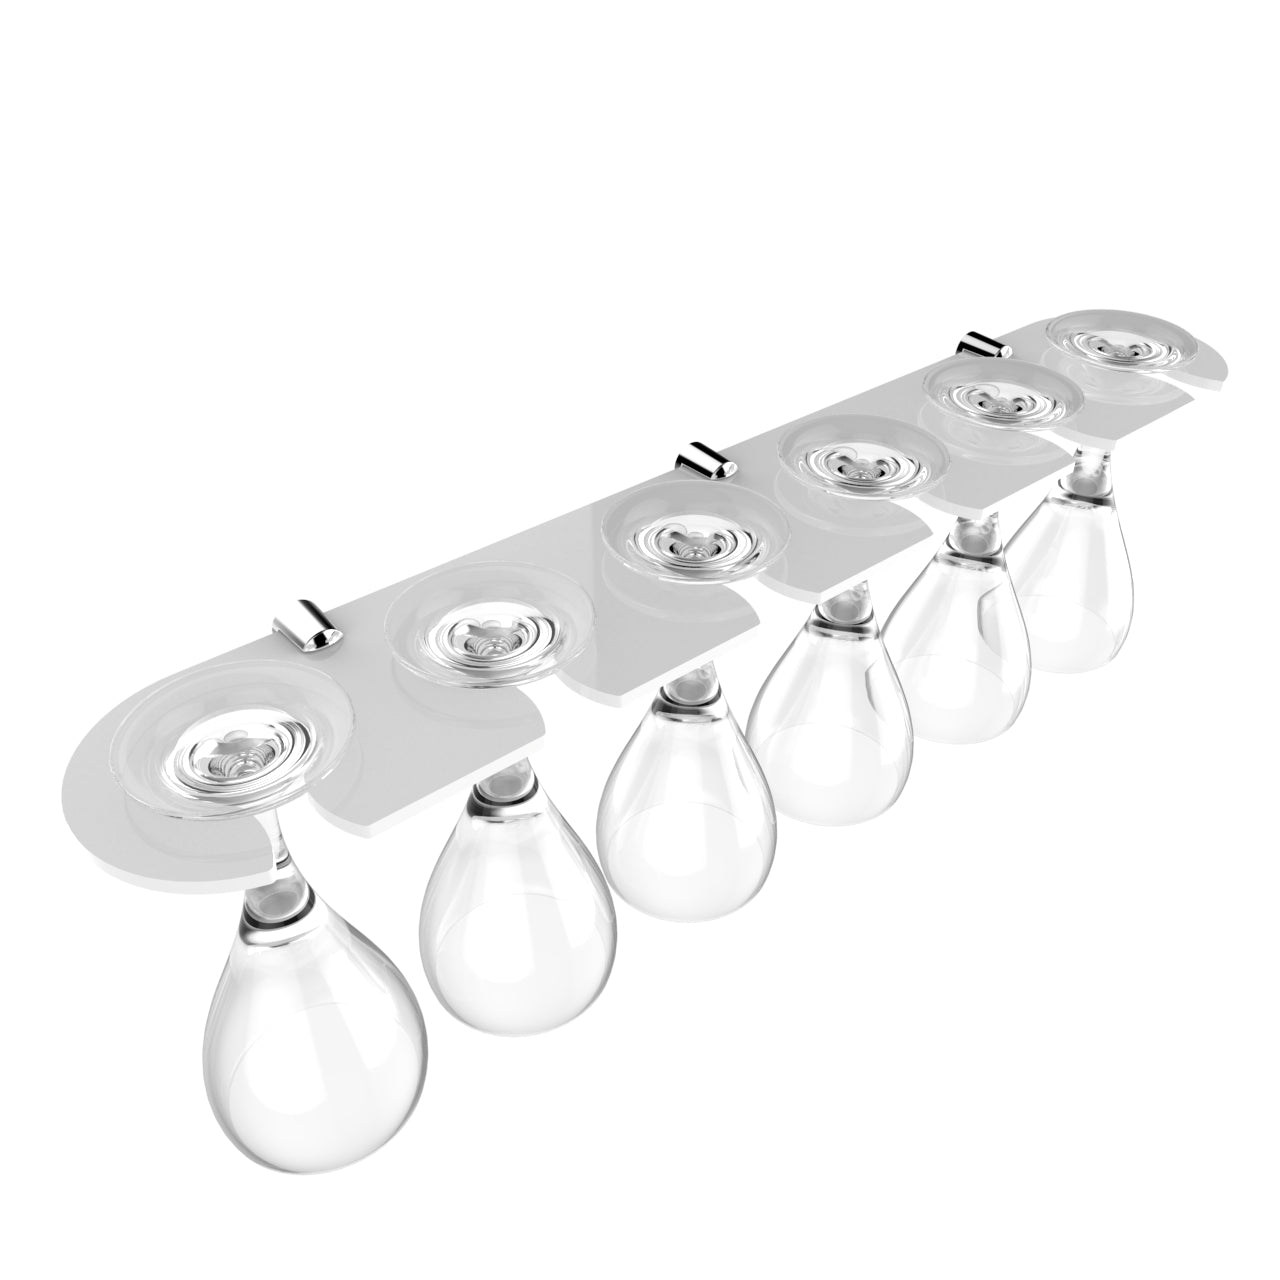 Straight Wine Glass Holder - Expression Products Ltd